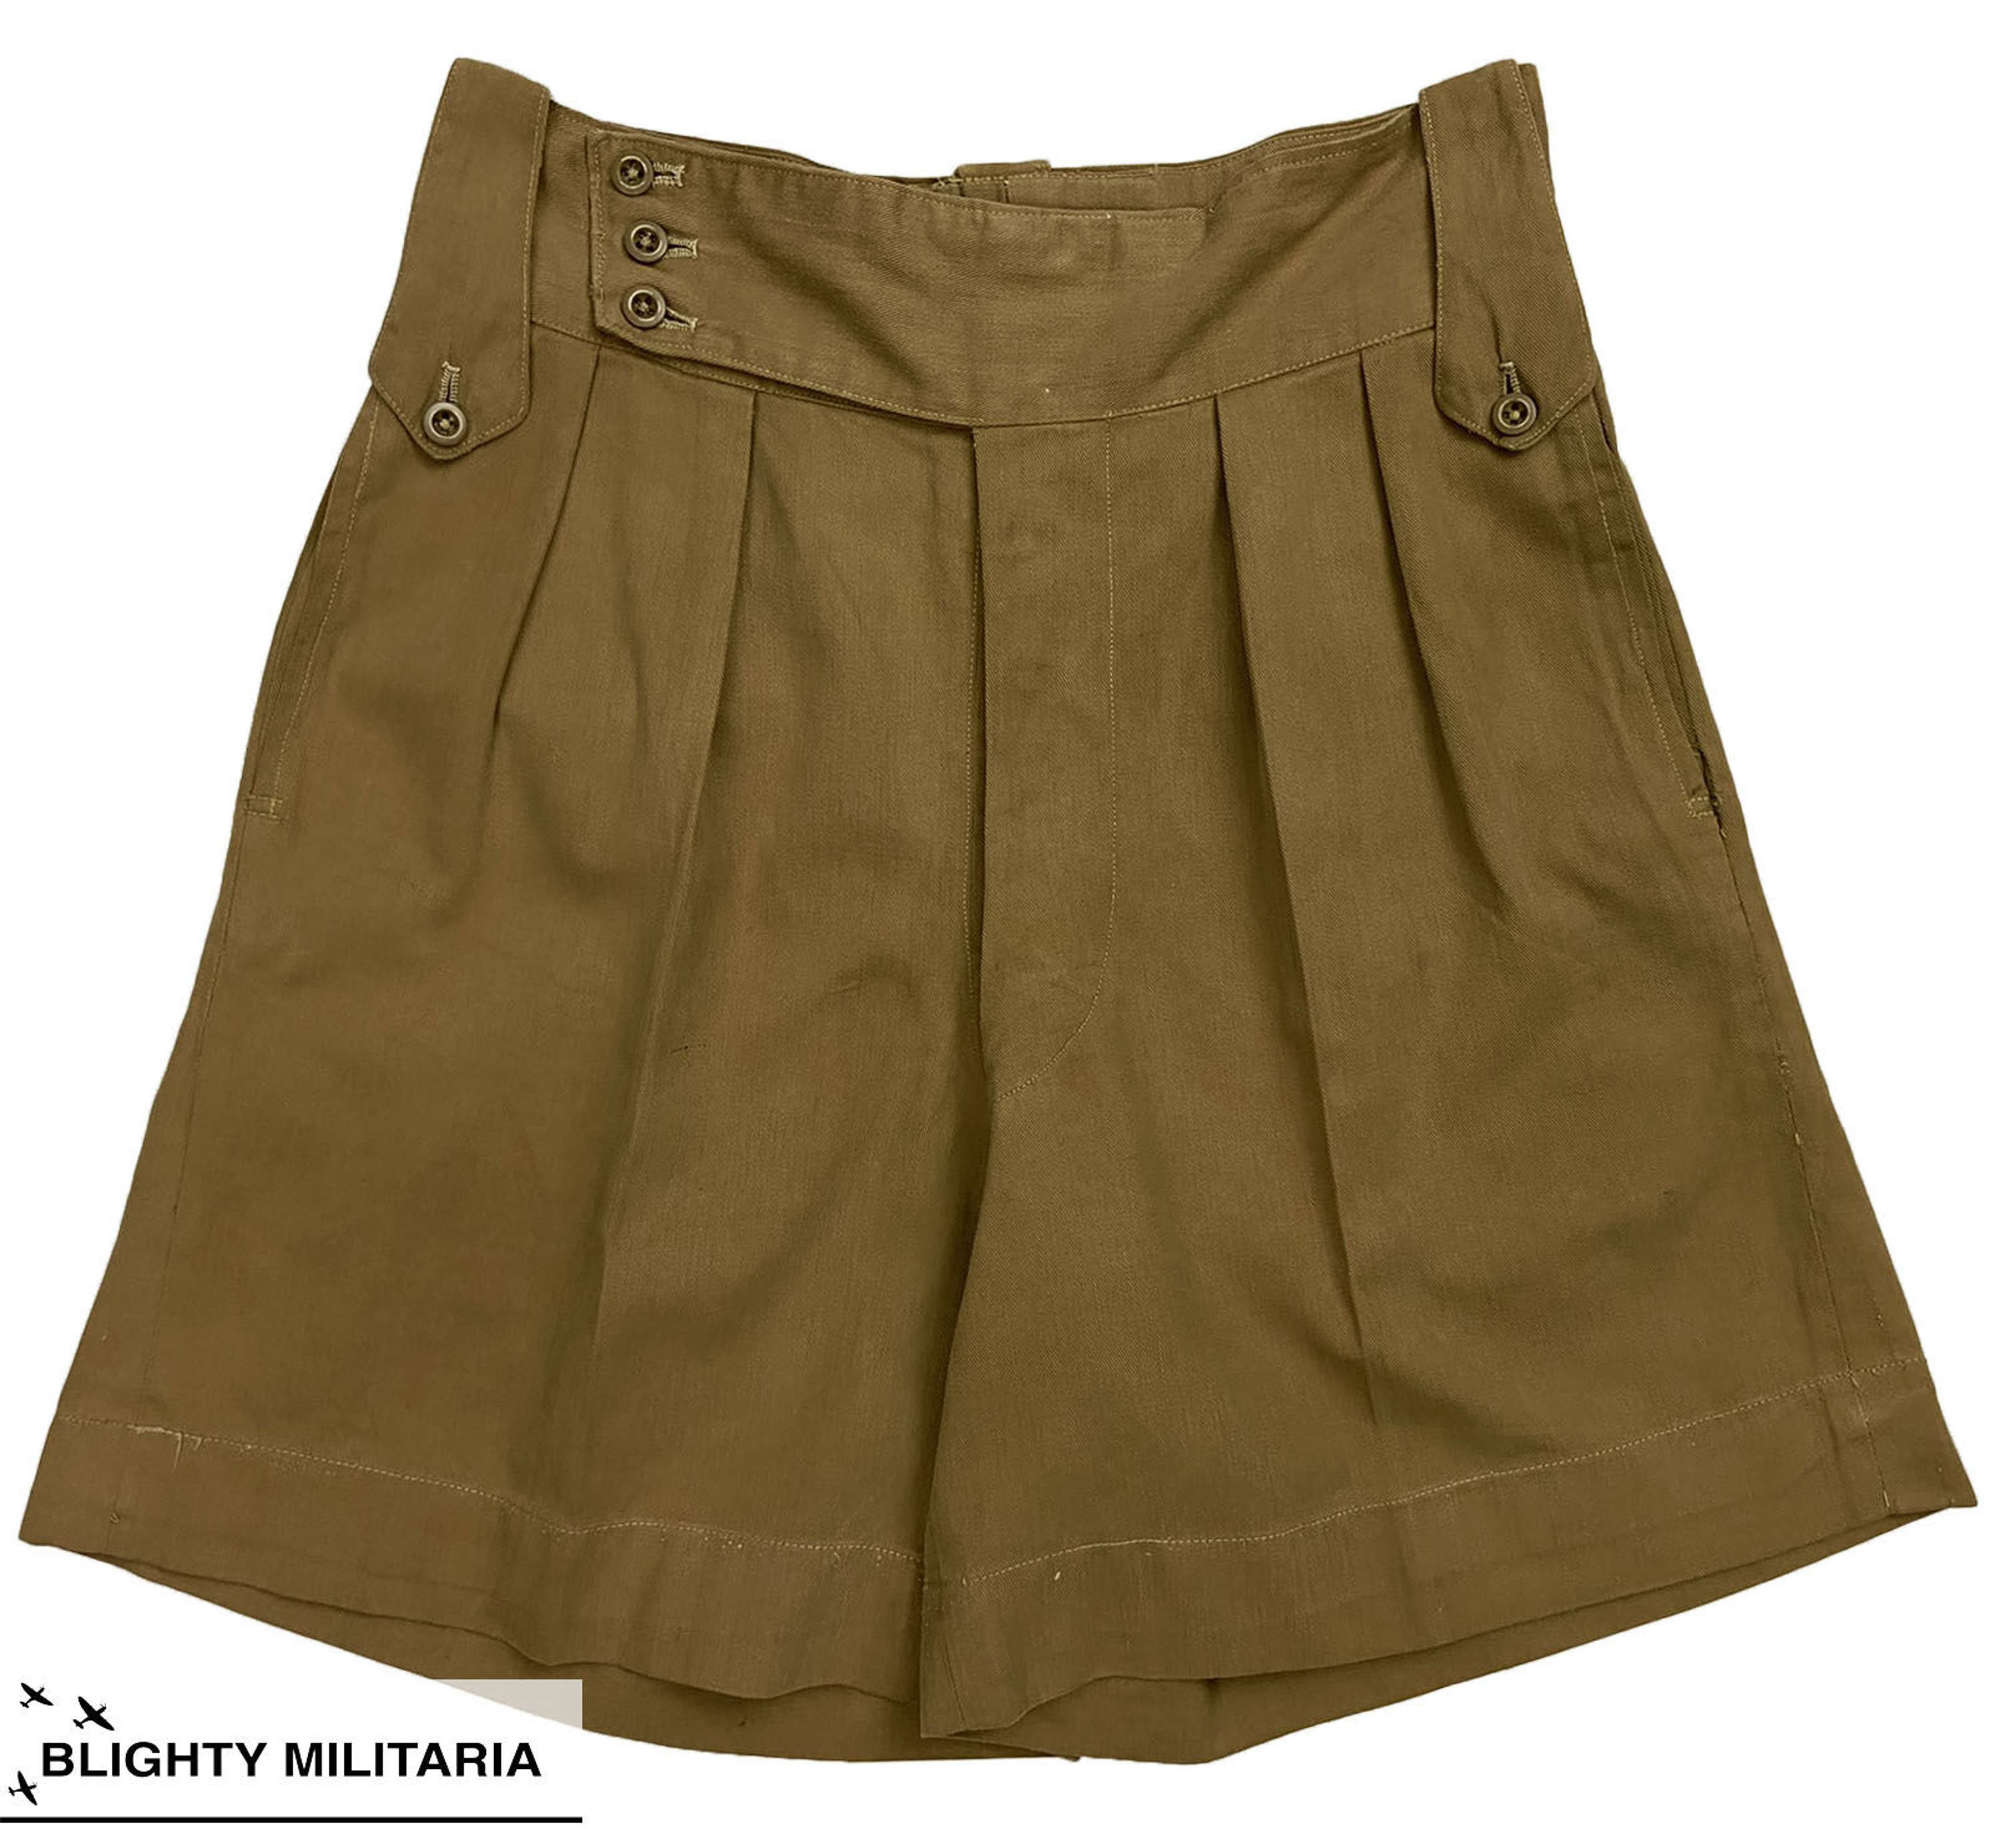 Original 1962 Dated British Army Khaki Drill Shorts by 'Gieves'